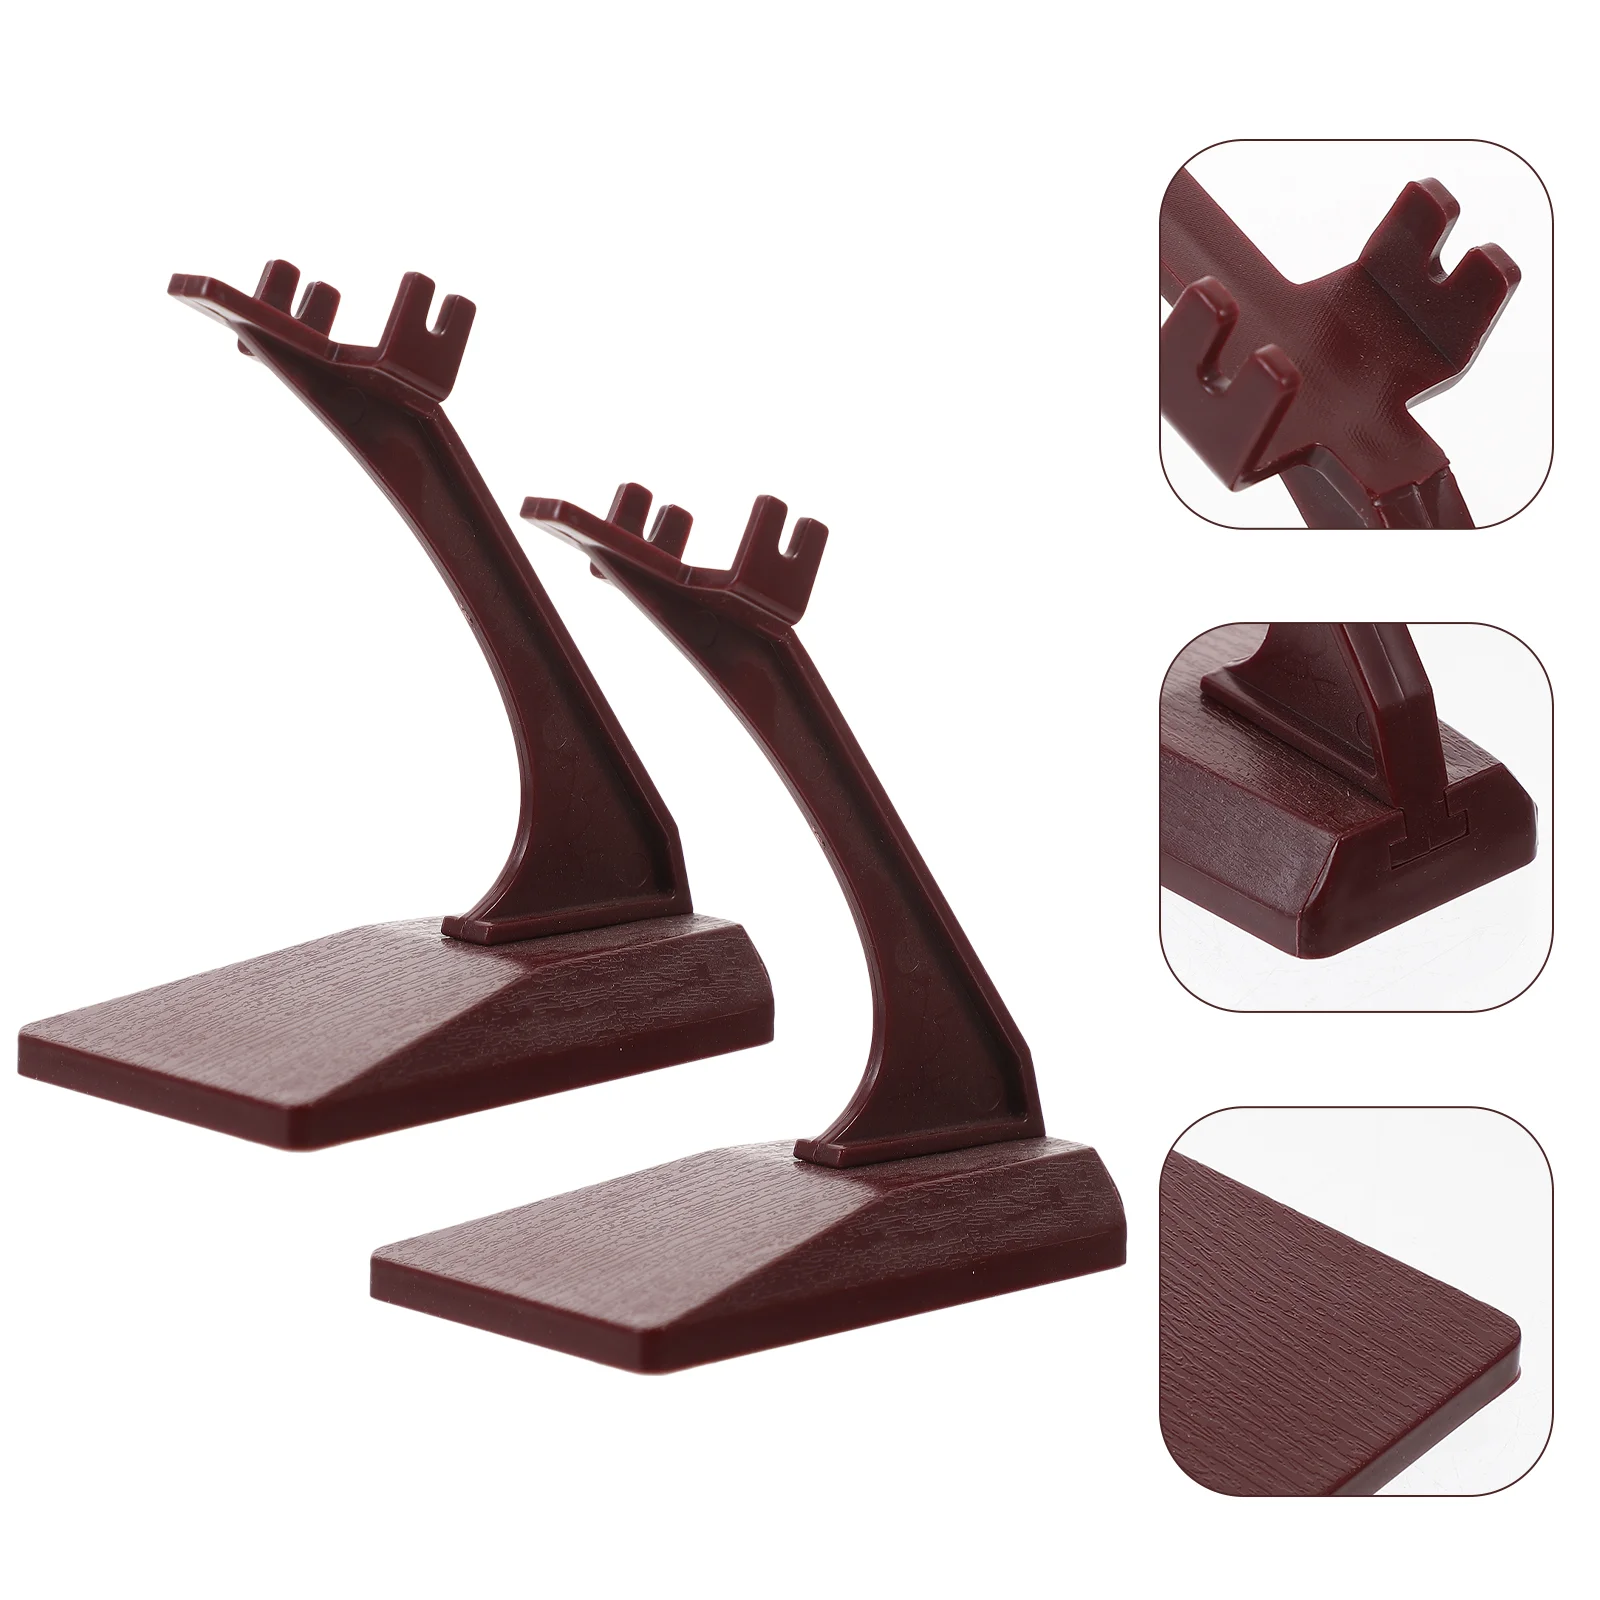 

2 Pcs Bracket Tabletop Decor Plane Model Storage Stand Plastic Statue Airplane Decors Display Stands Holder Aircraft Toy